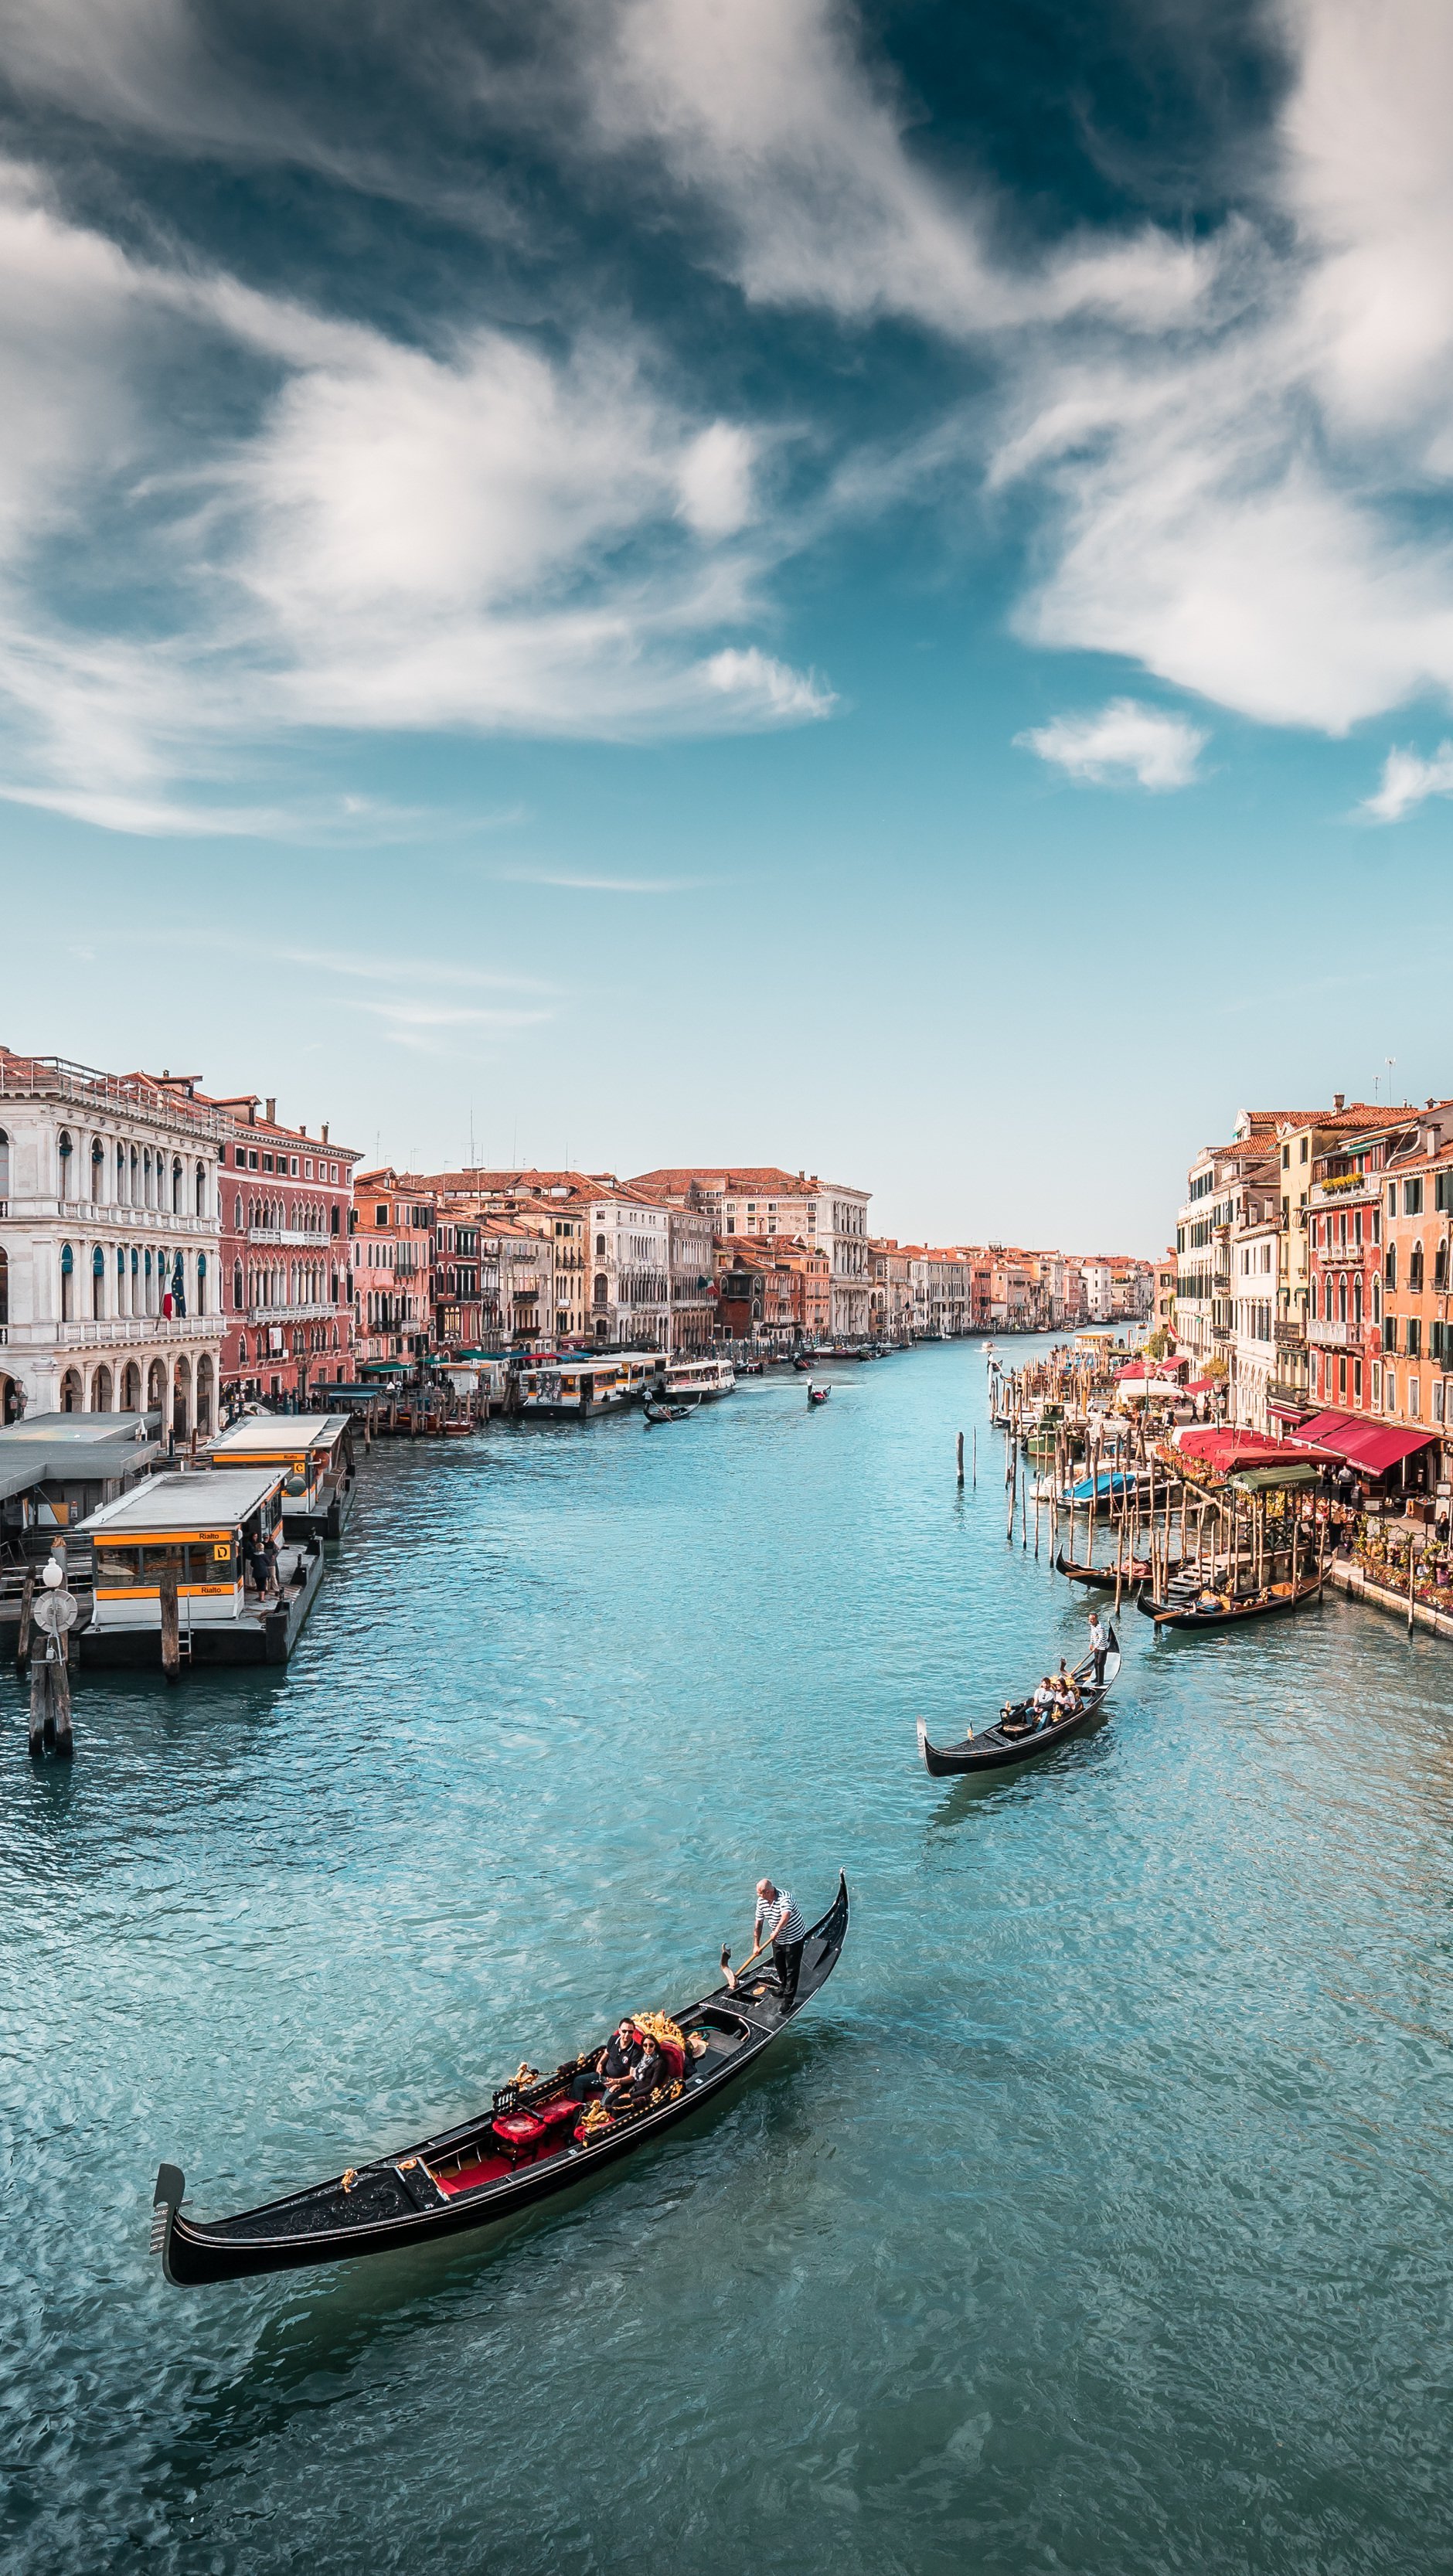 150 Venice HD Wallpapers and Backgrounds